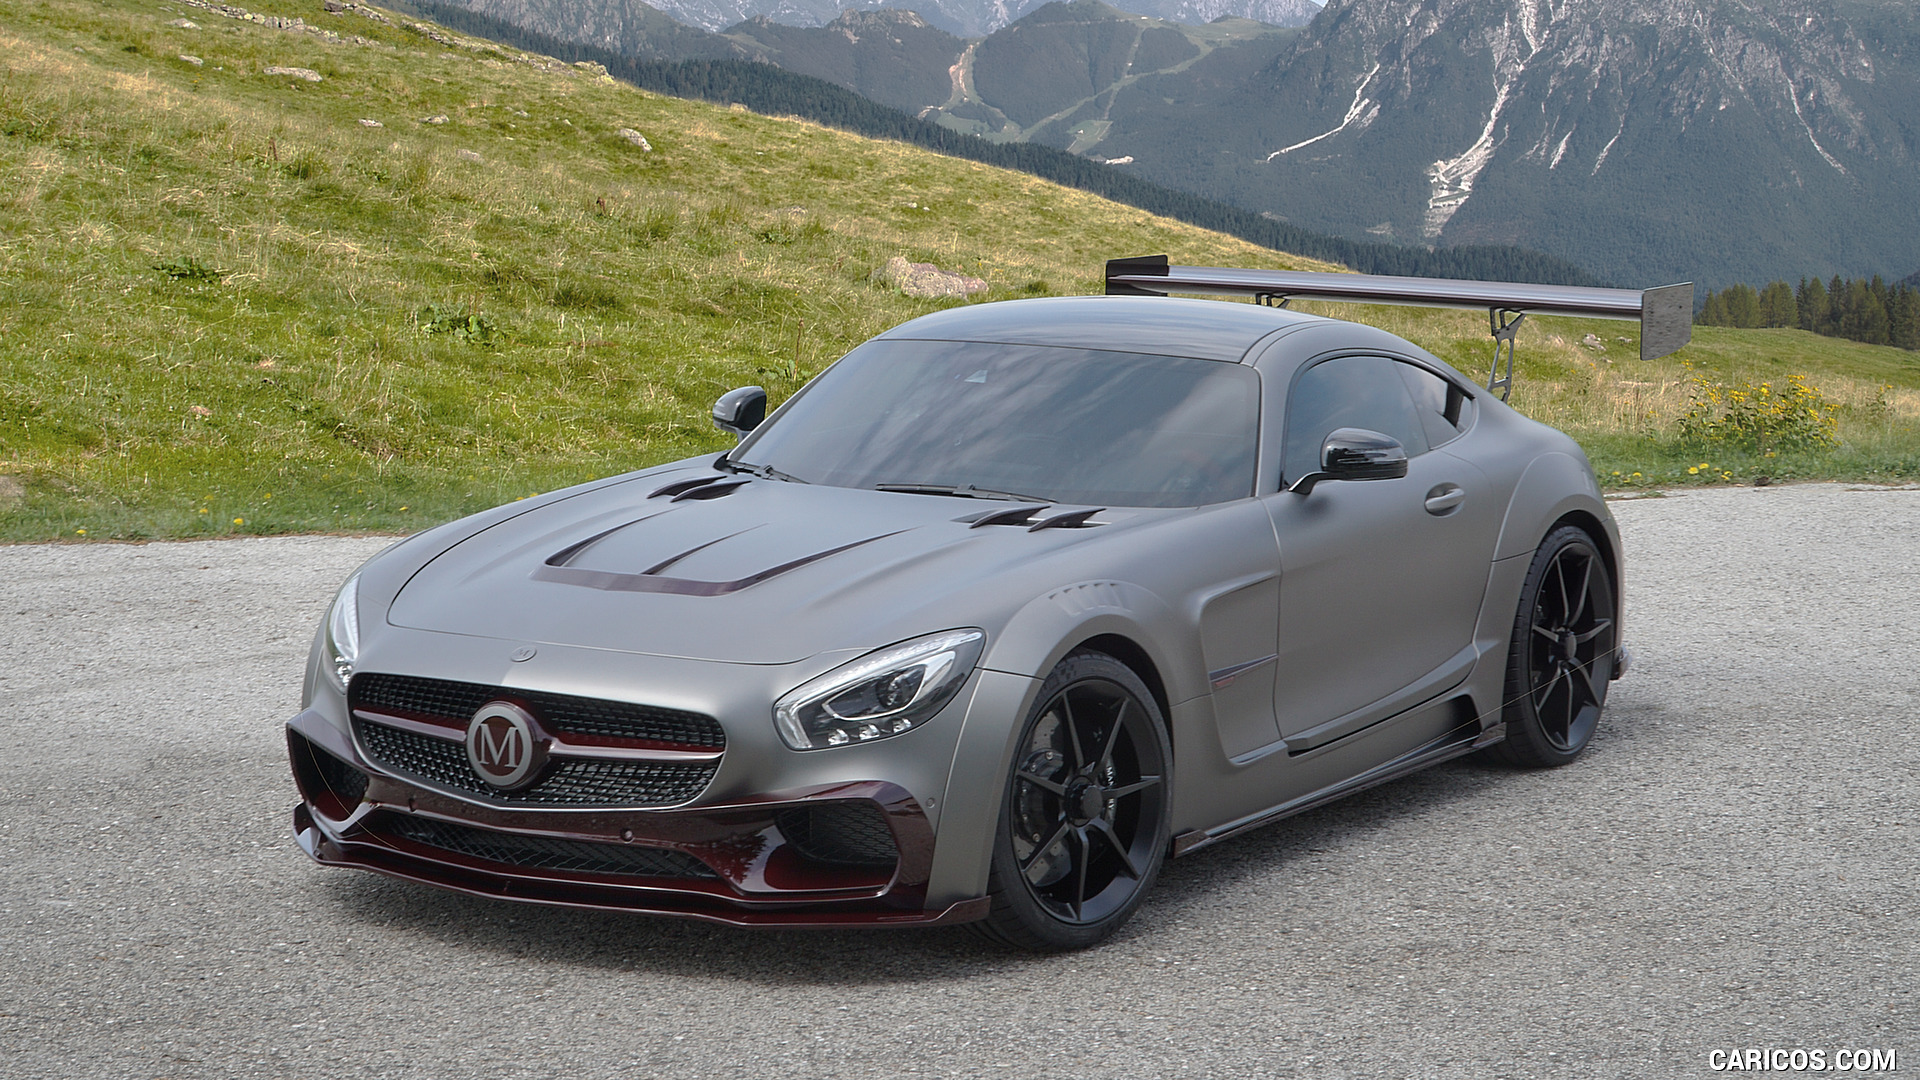 2016 MANSORY Mercedes-AMG GT S [One-Off]